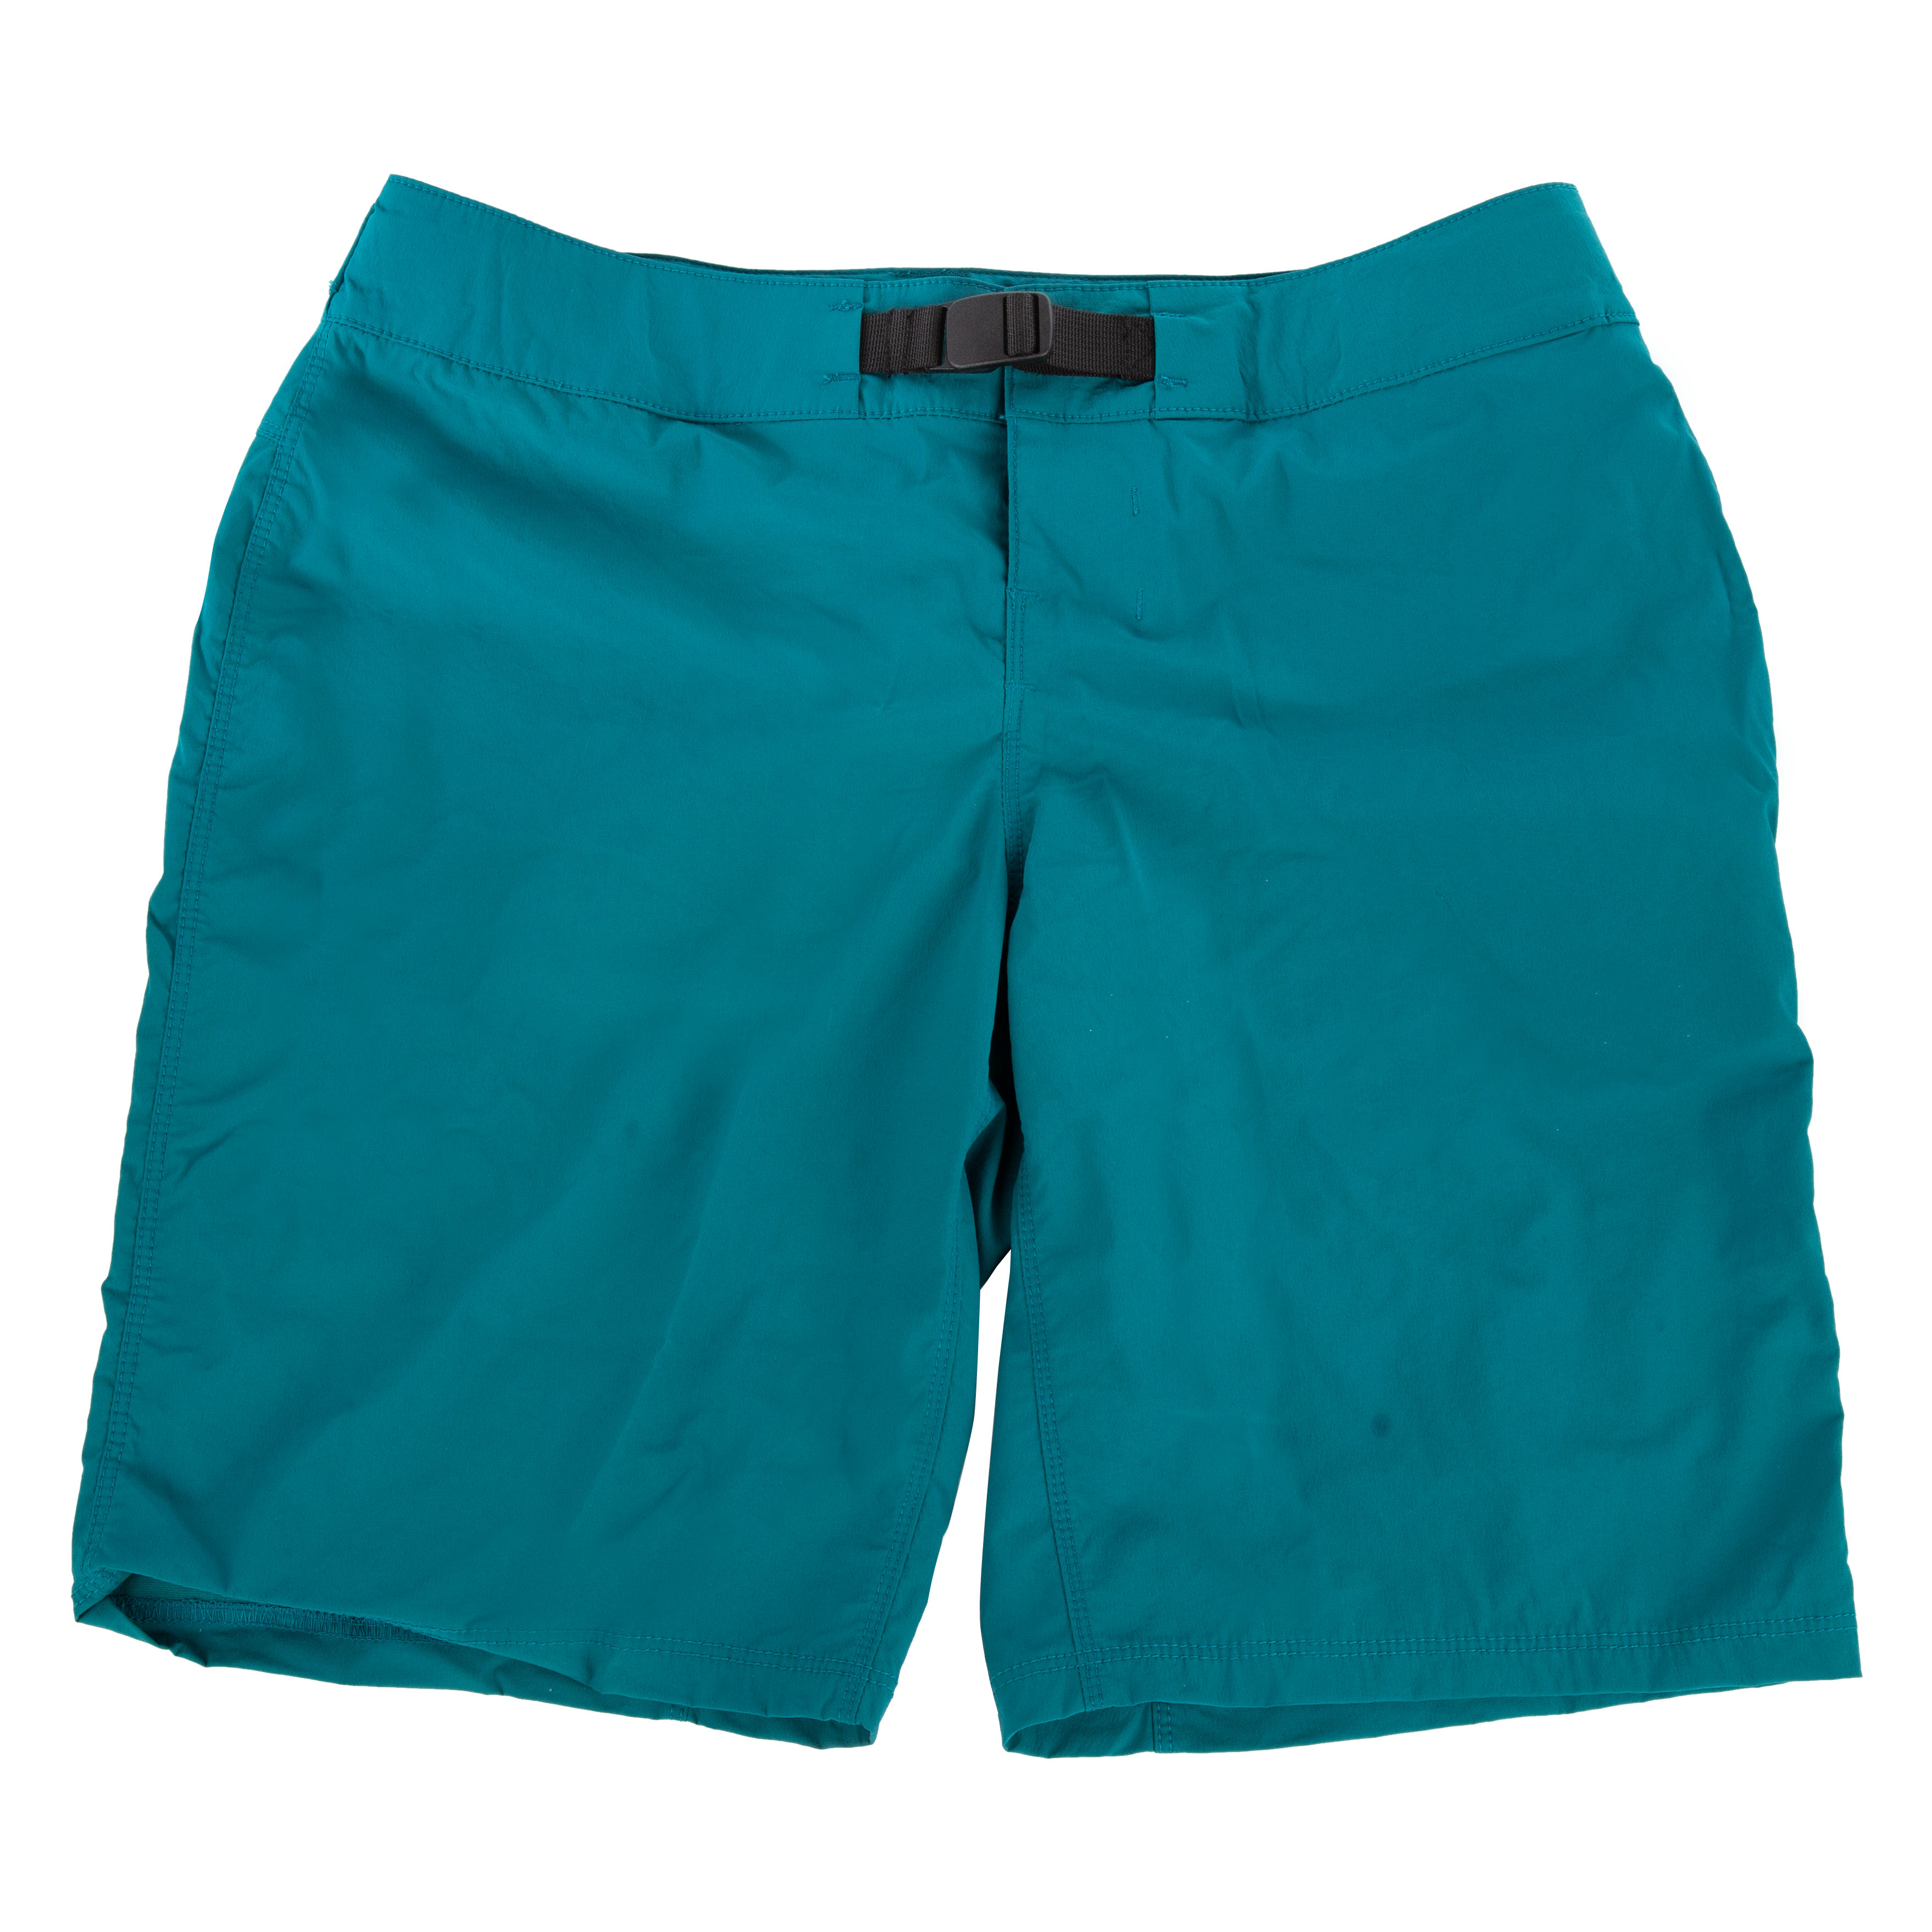 Specialized Adv Air Short Women's